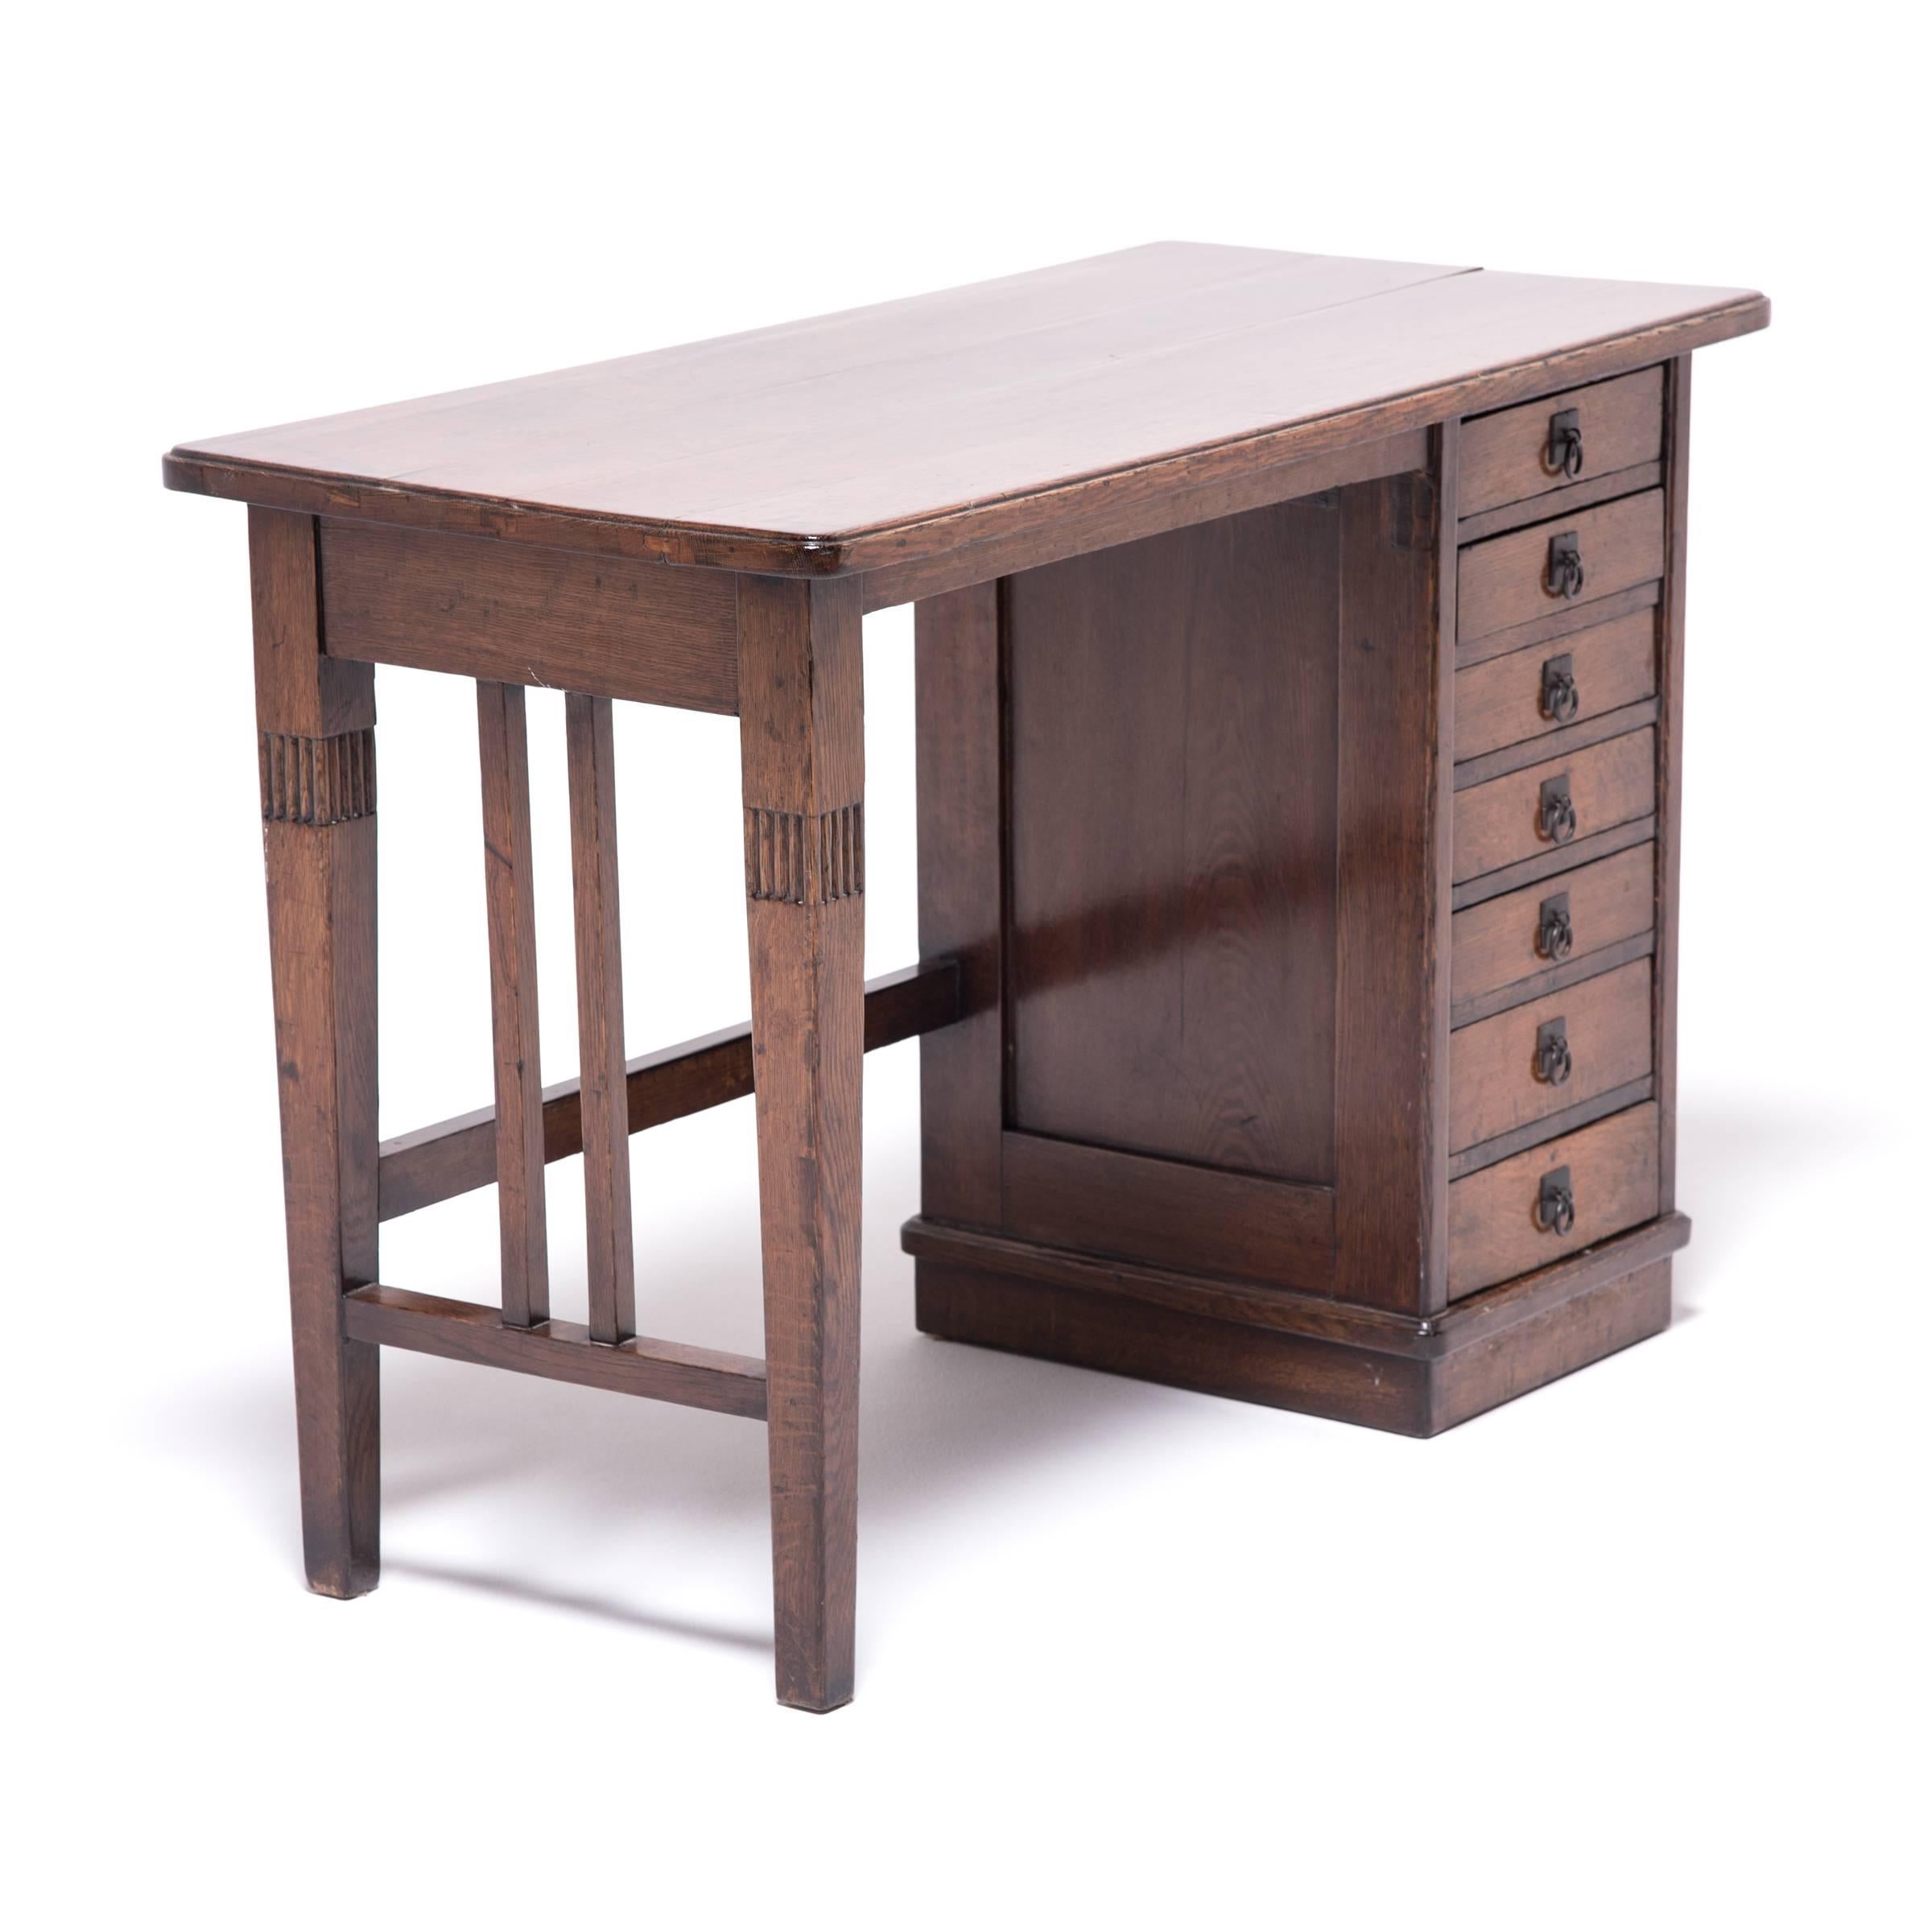 This petite elmwood desk charms with its unusual blend of east and west styles. Made in Northern China, the desk dates to the late 19th century, a period that saw great cultural exchange in art and design. Perhaps commissioned by a foreigner or